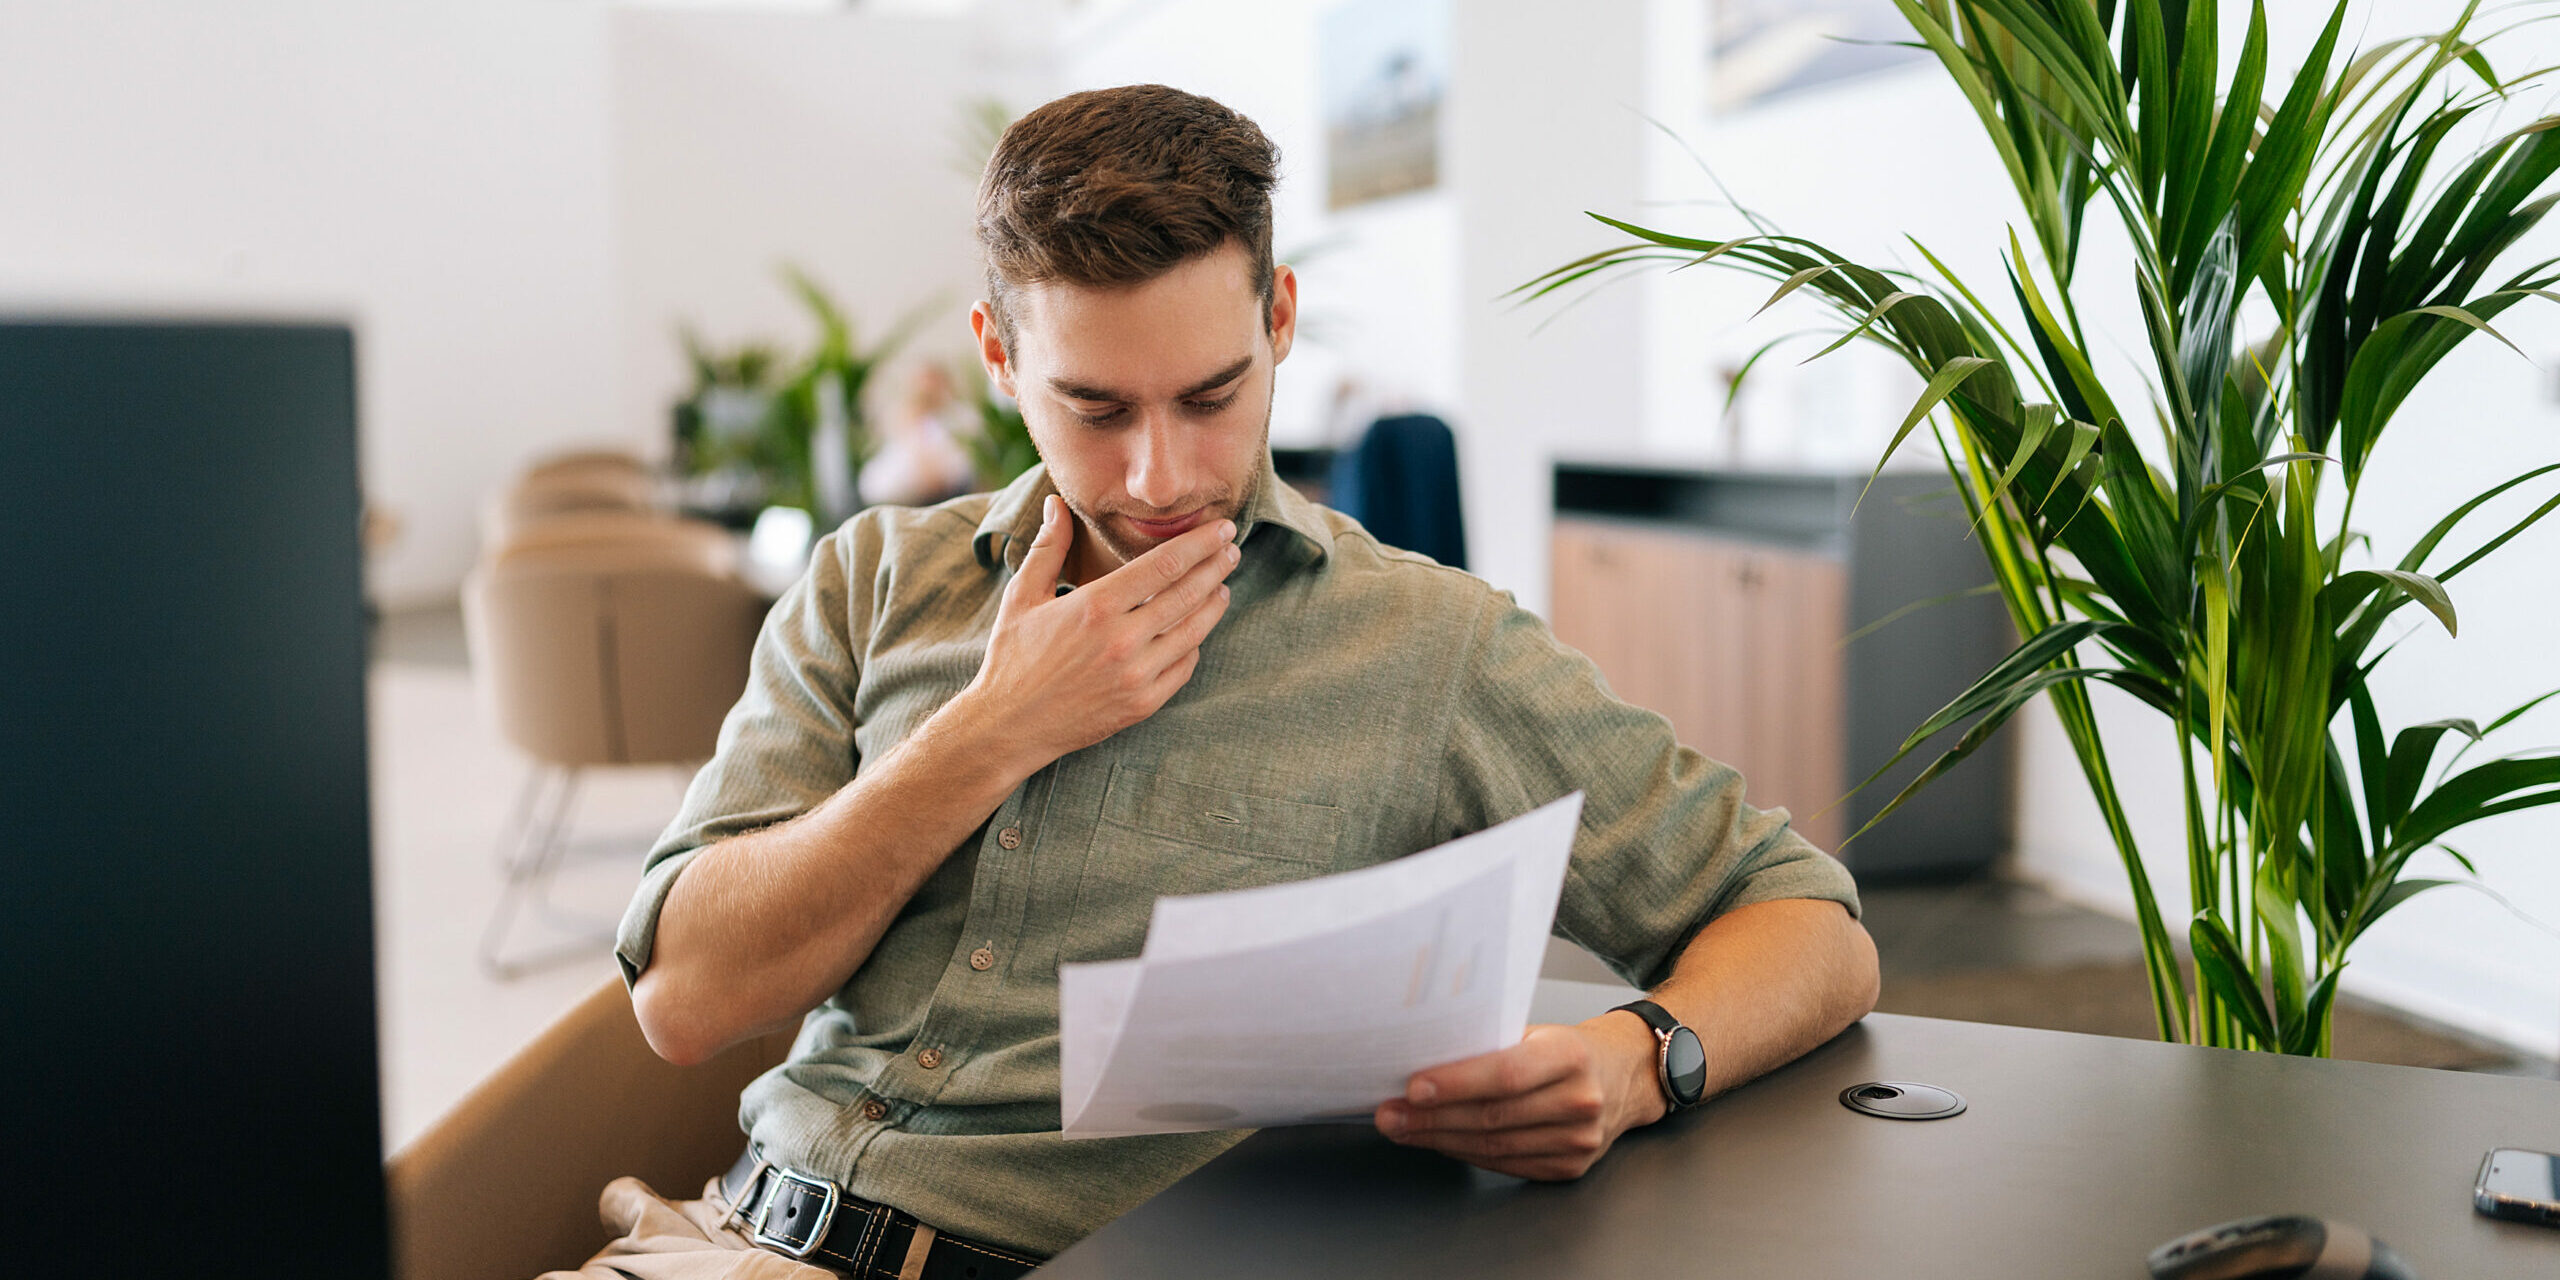 Portrait of focused male client reading contract for real estate property purchase. Thoughtful man reading terms of conditions of document, making decision about house purchase or financial investment